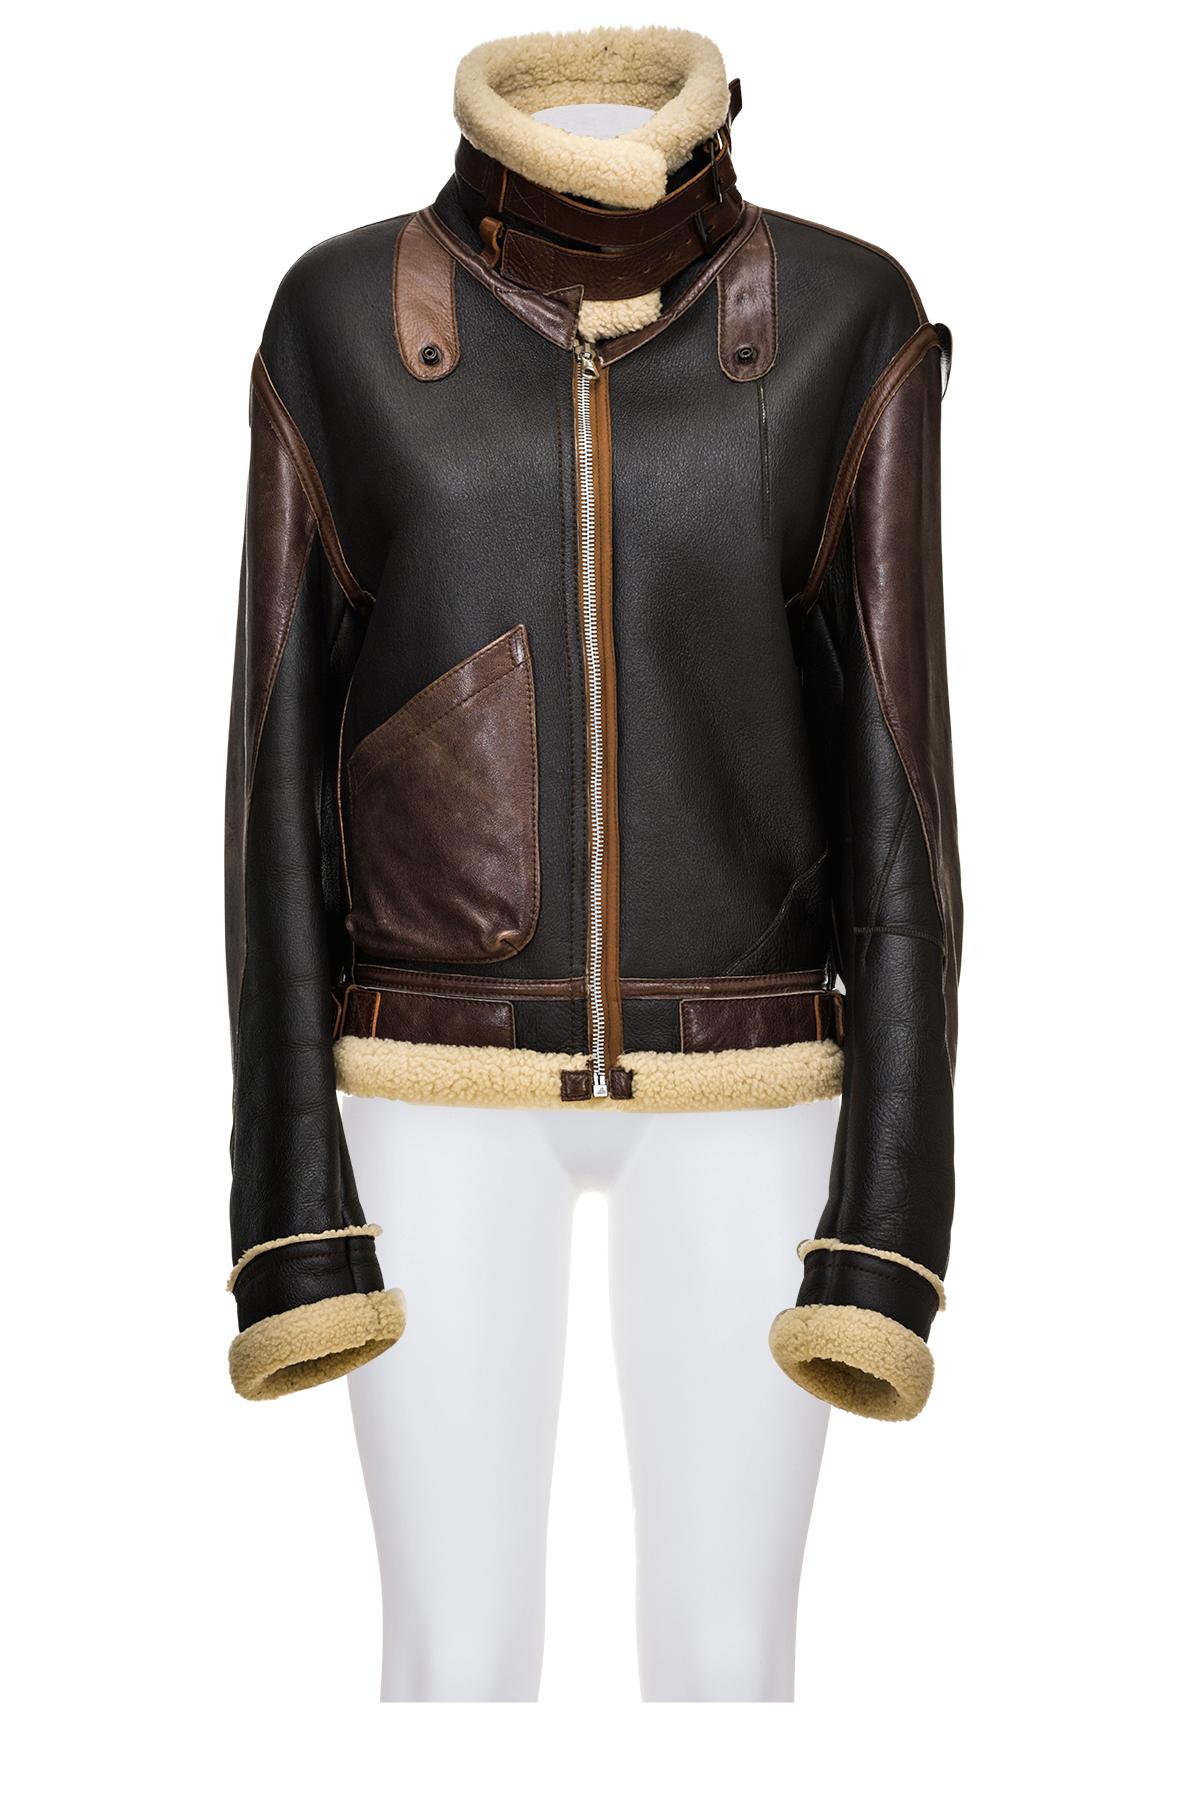 Fall Winter 2003 iconic shearling aviator jacket by Nicolas Ghesquière for Balenciaga. 
Zipper closure at front.
Two straps at collar.
One pocket.
The composition is 100% leather.